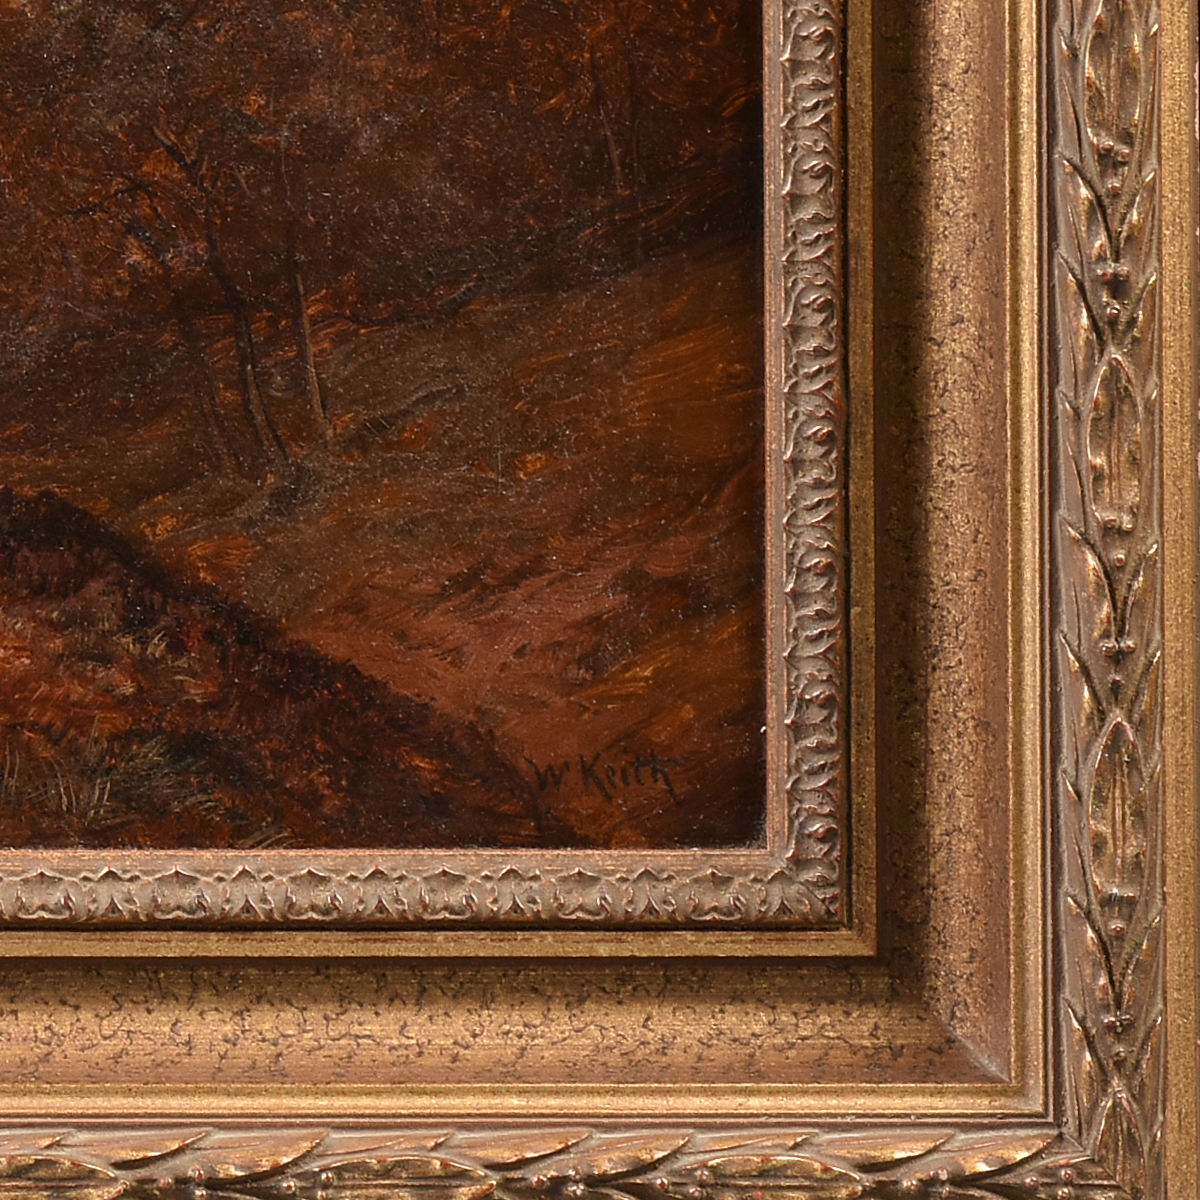 WILLIAM KEITH (American 1838-1911) A PAINTING, “Mountain Valley Landscape,” oil on canvas, signed - Image 3 of 14